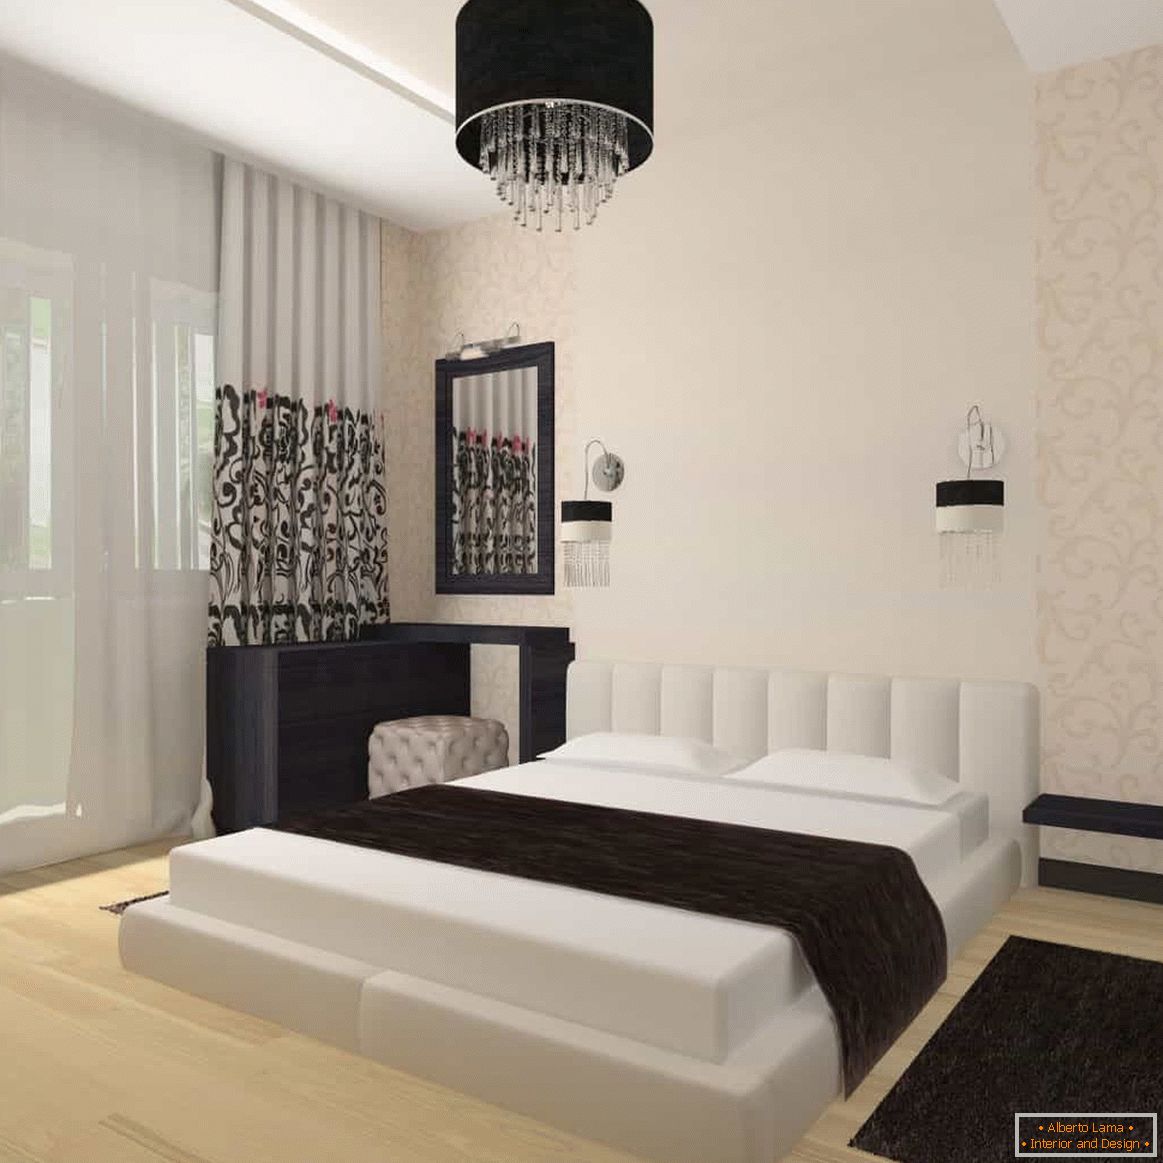 Design project bedrooms 4 by 4 meters